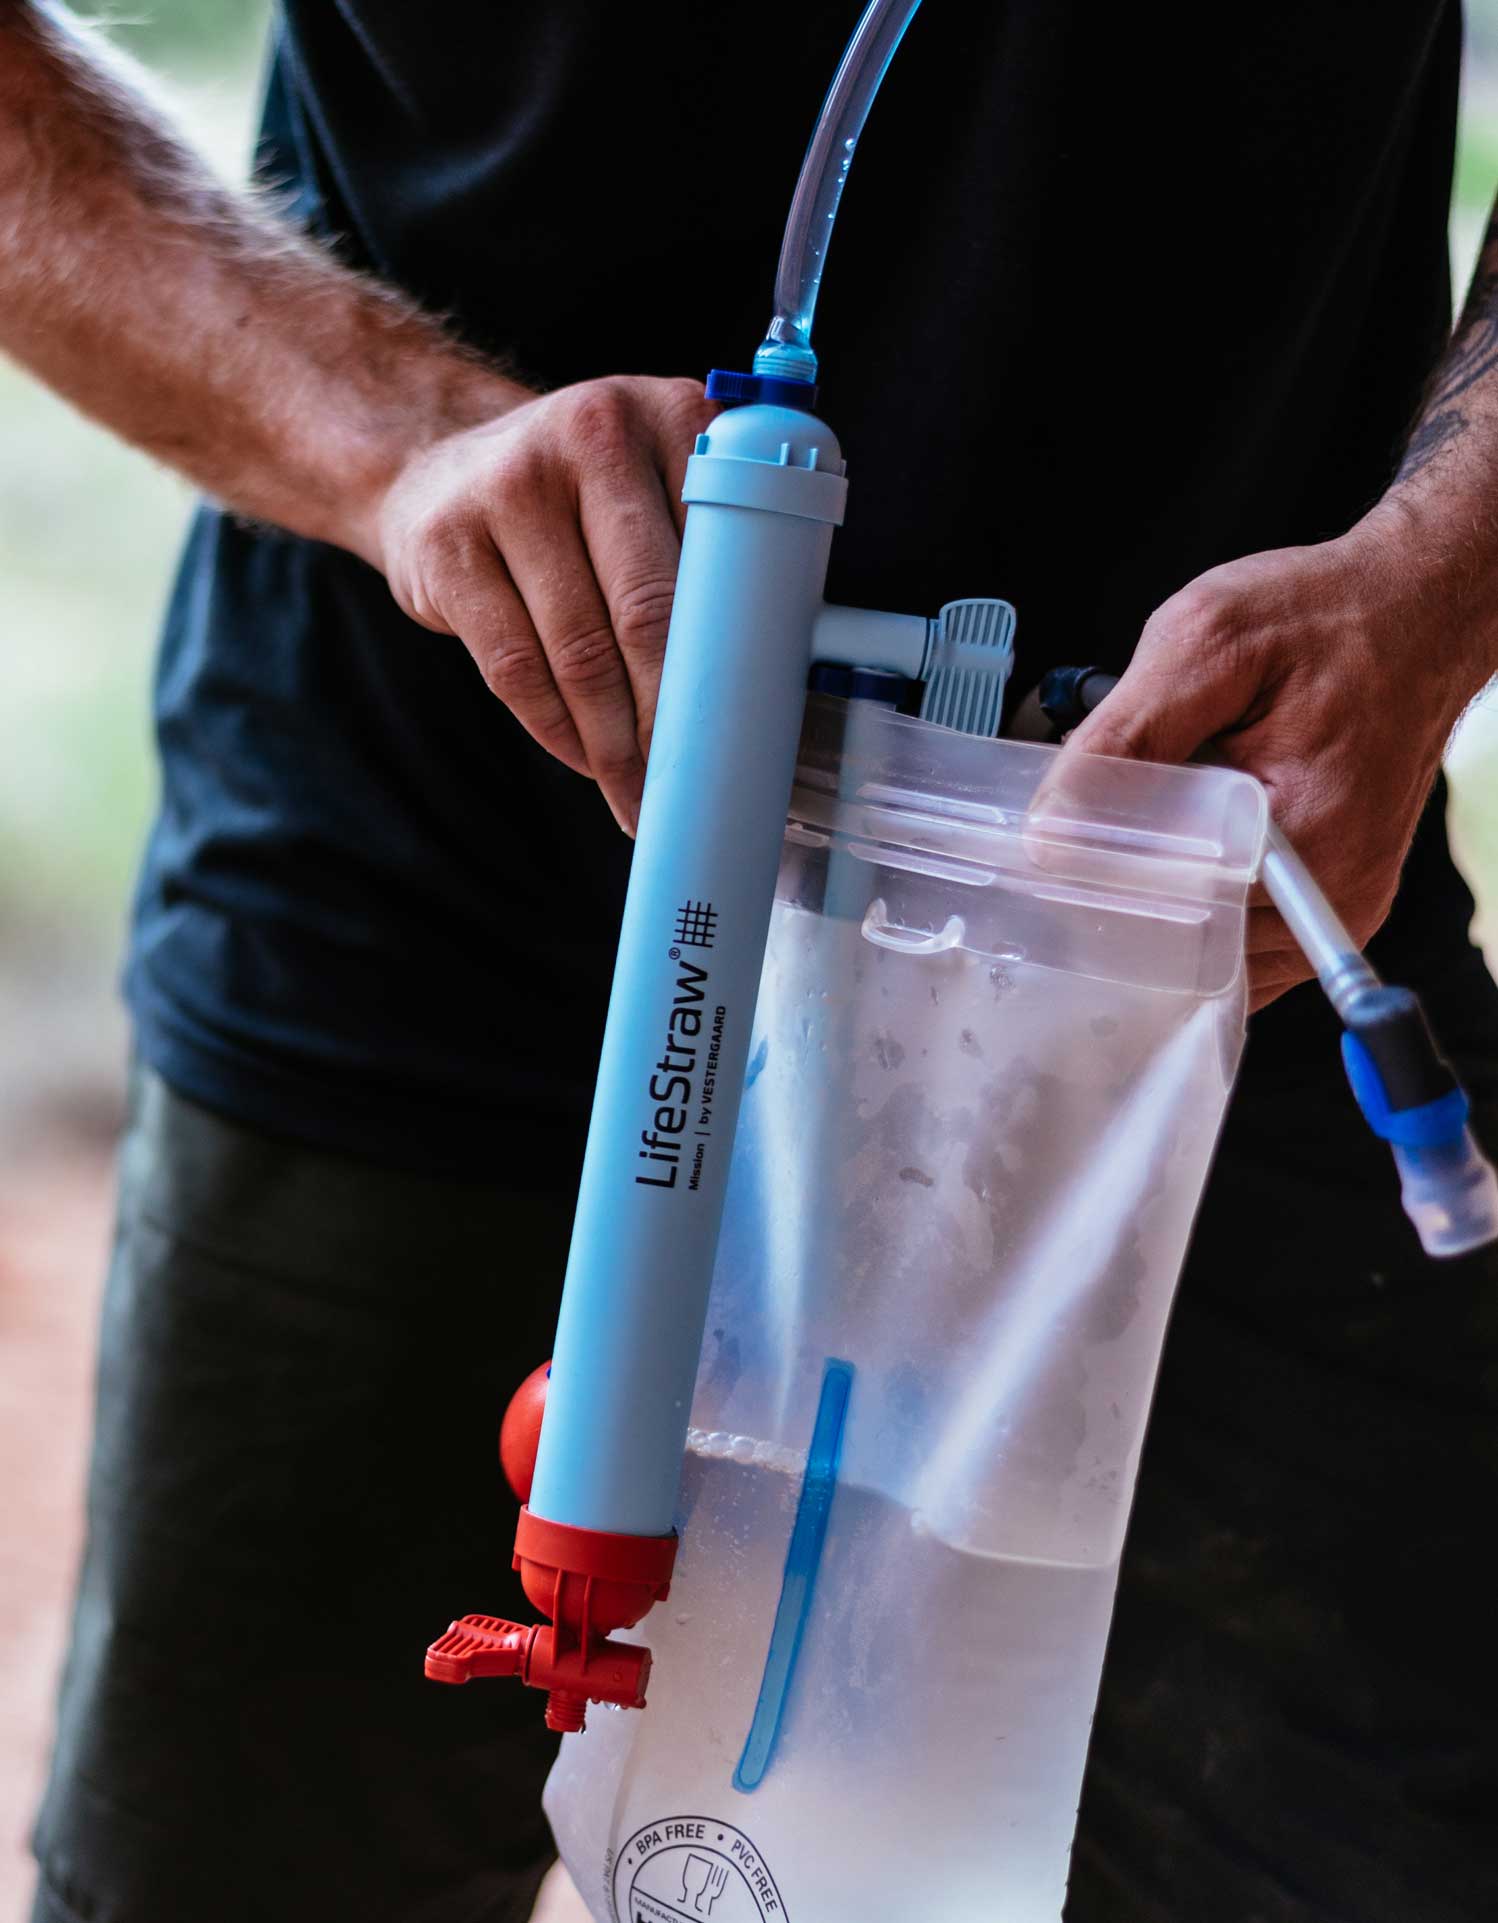 LifeStraw Max High Flow Water Purifier for Survival, Humanitarian Aid, and  Remote Job Sites – LifeStraw Water Filters & Purifiers